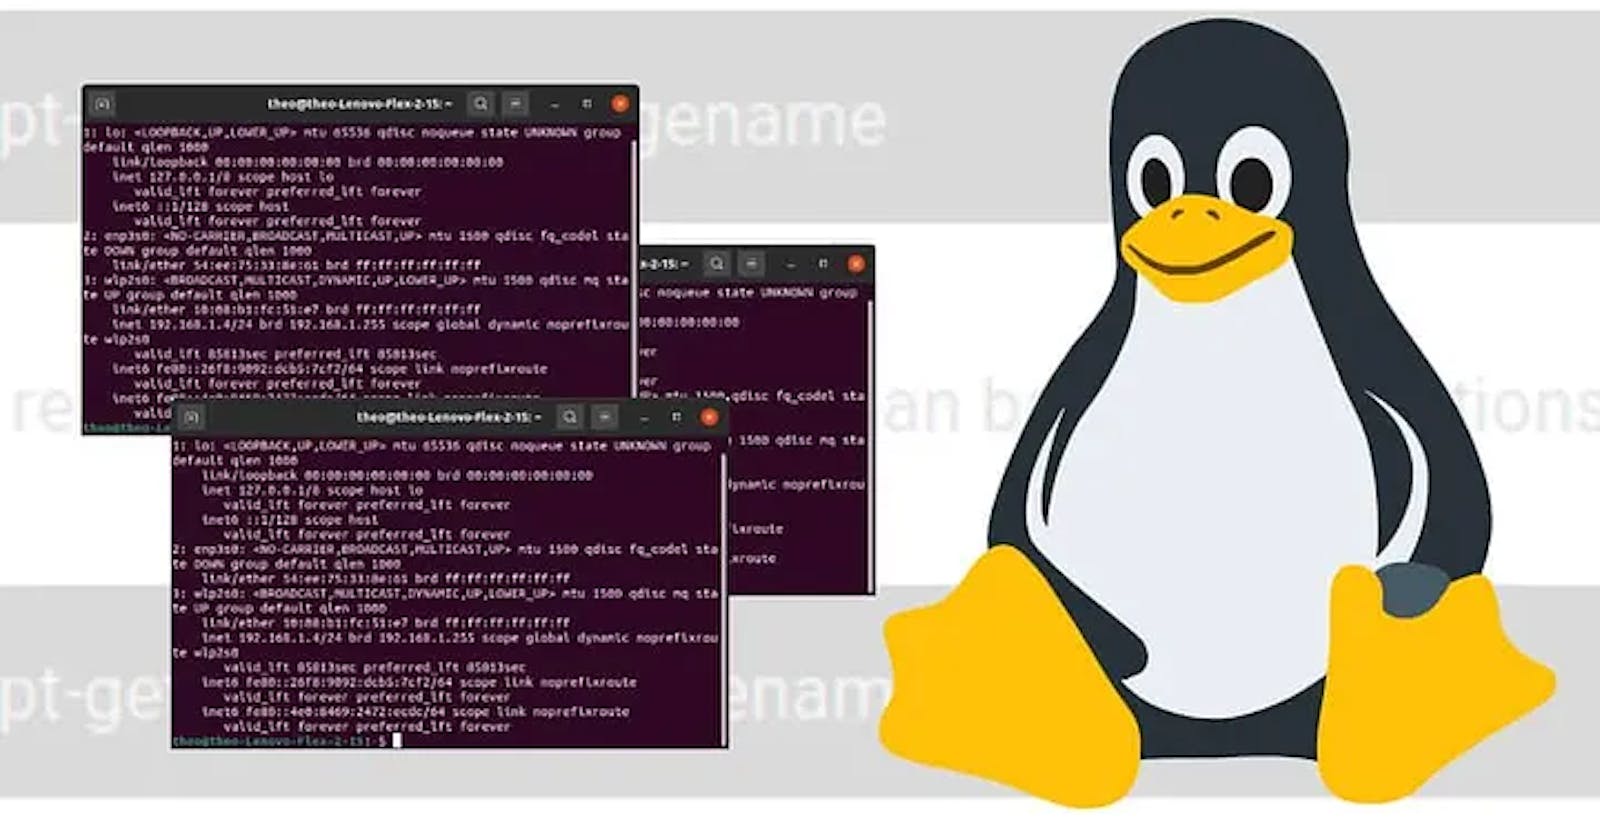 Important Linux Commands you will require as Linux Admin /Devops Engineer /Site Reliability Engineer.